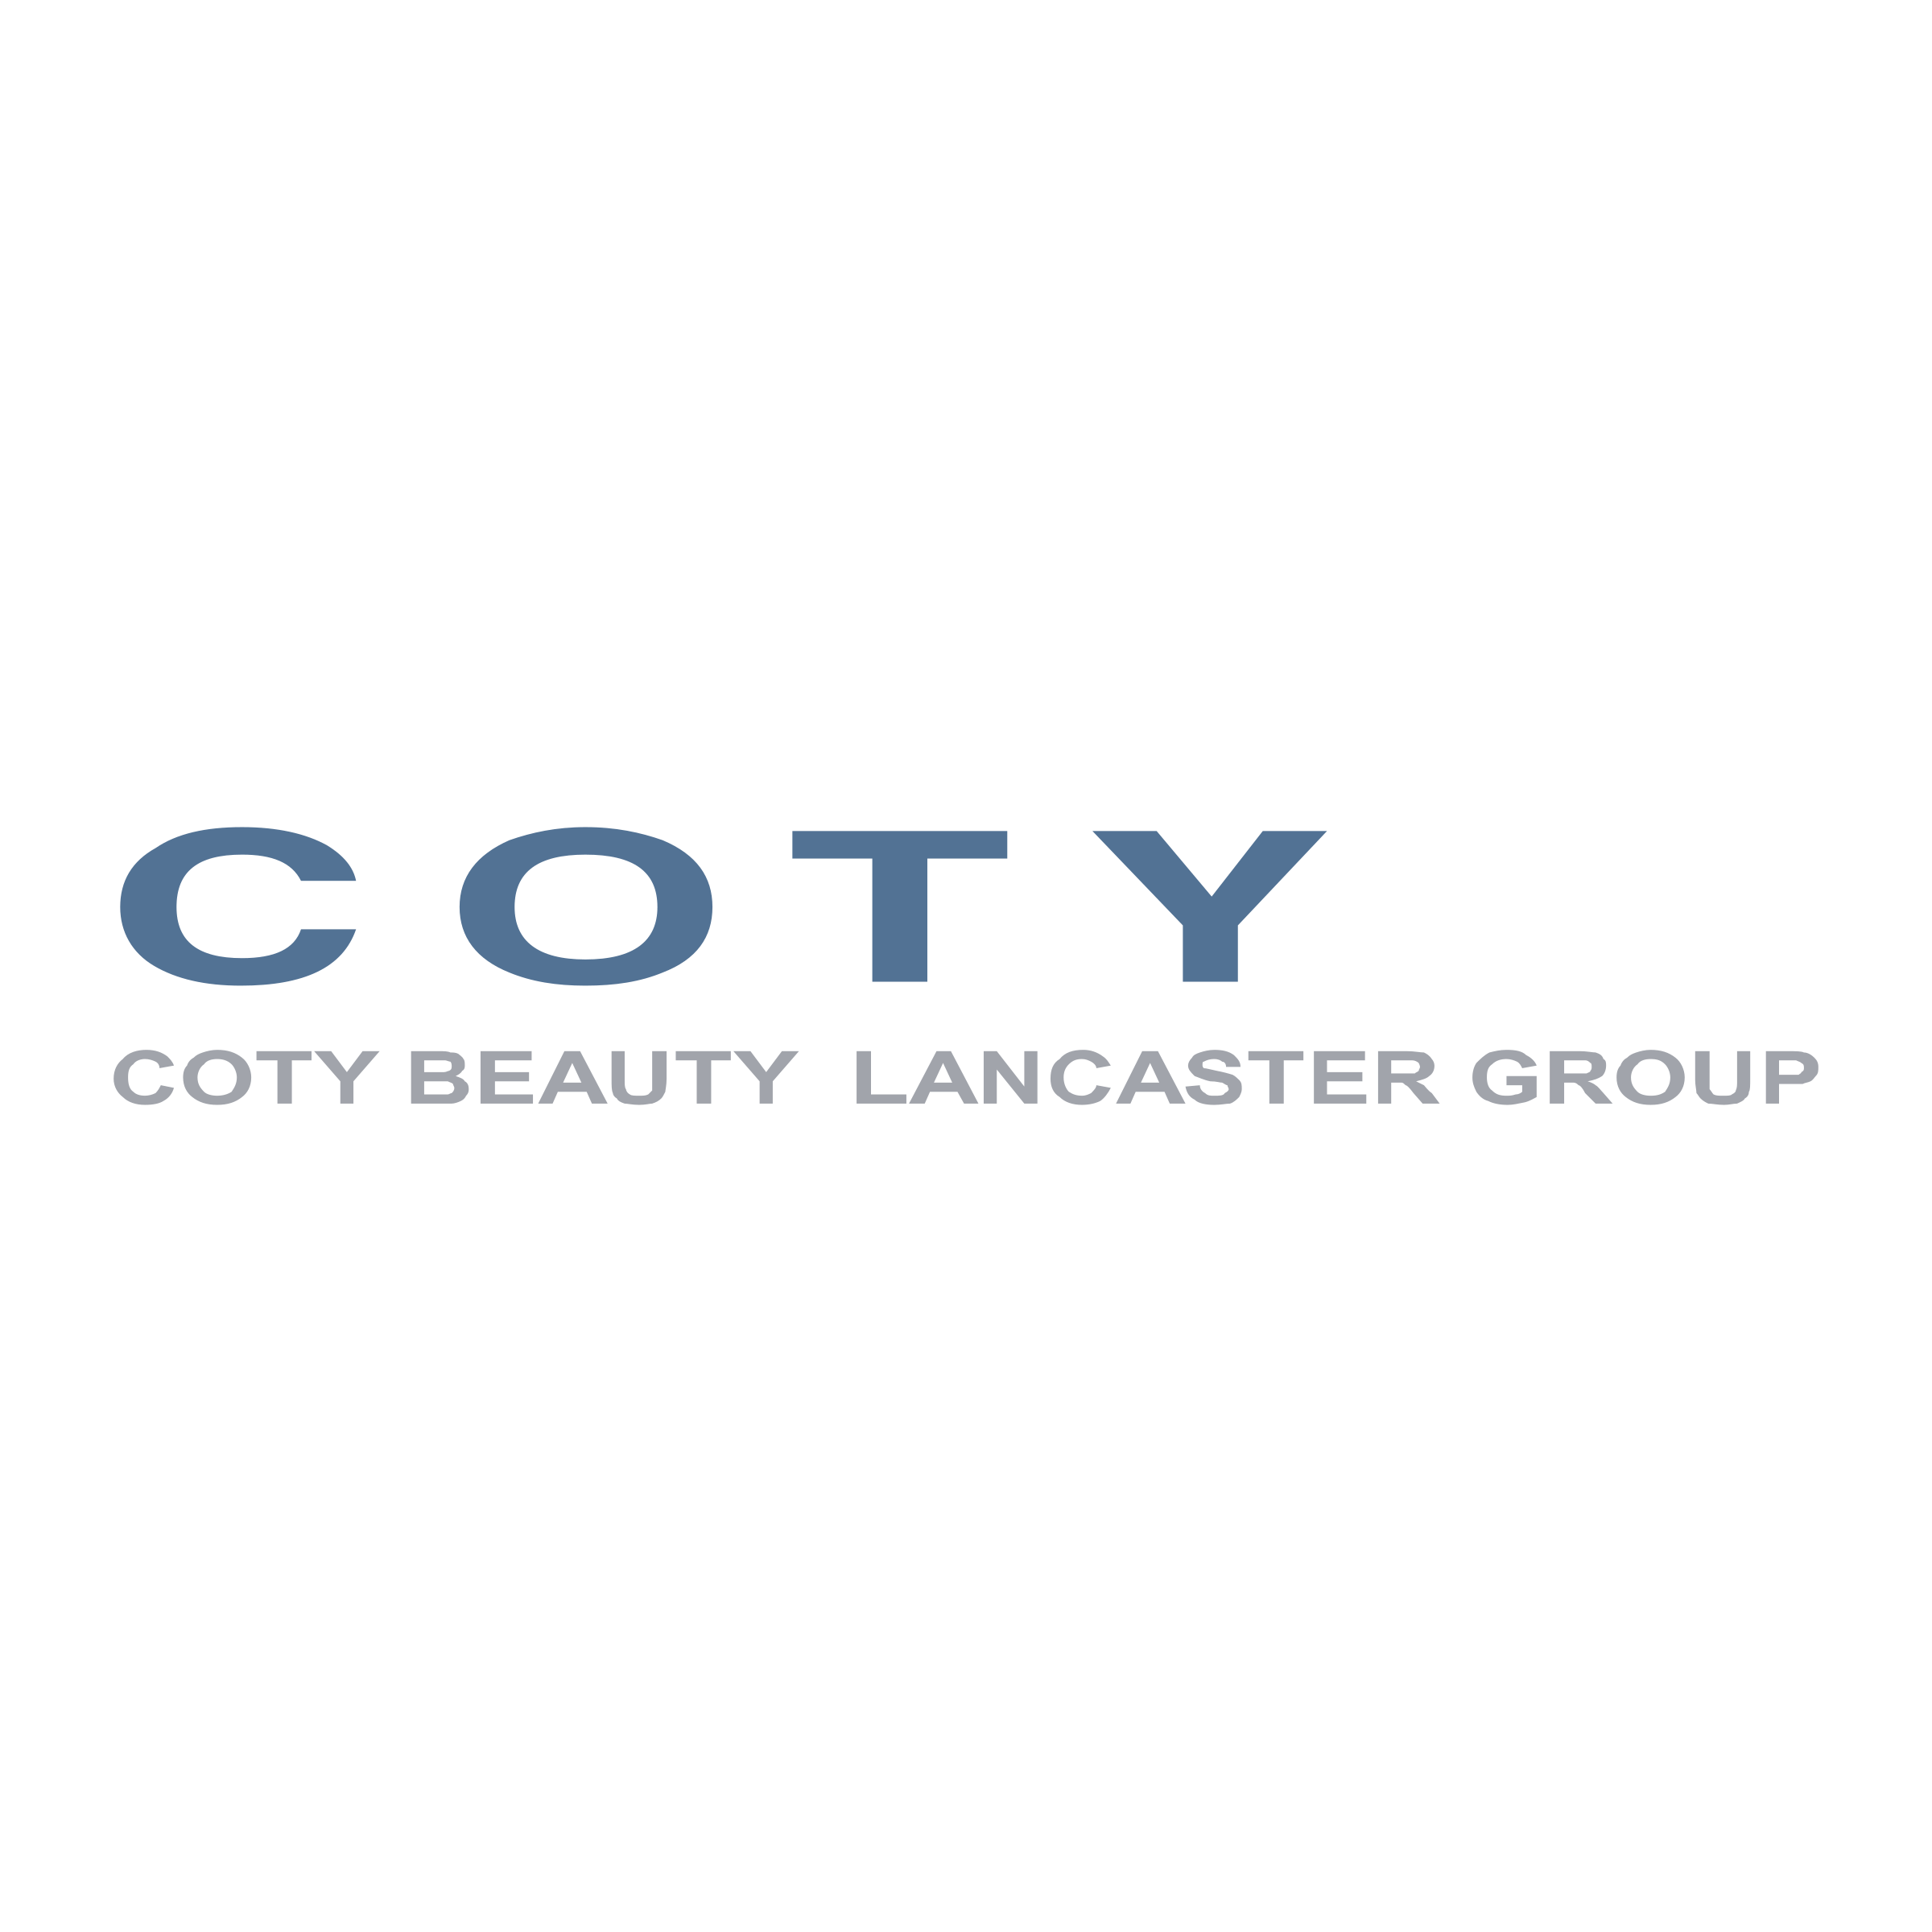 Coty Logo - Coty Beauty Logo PNG Transparent & SVG Vector - Freebie Supply